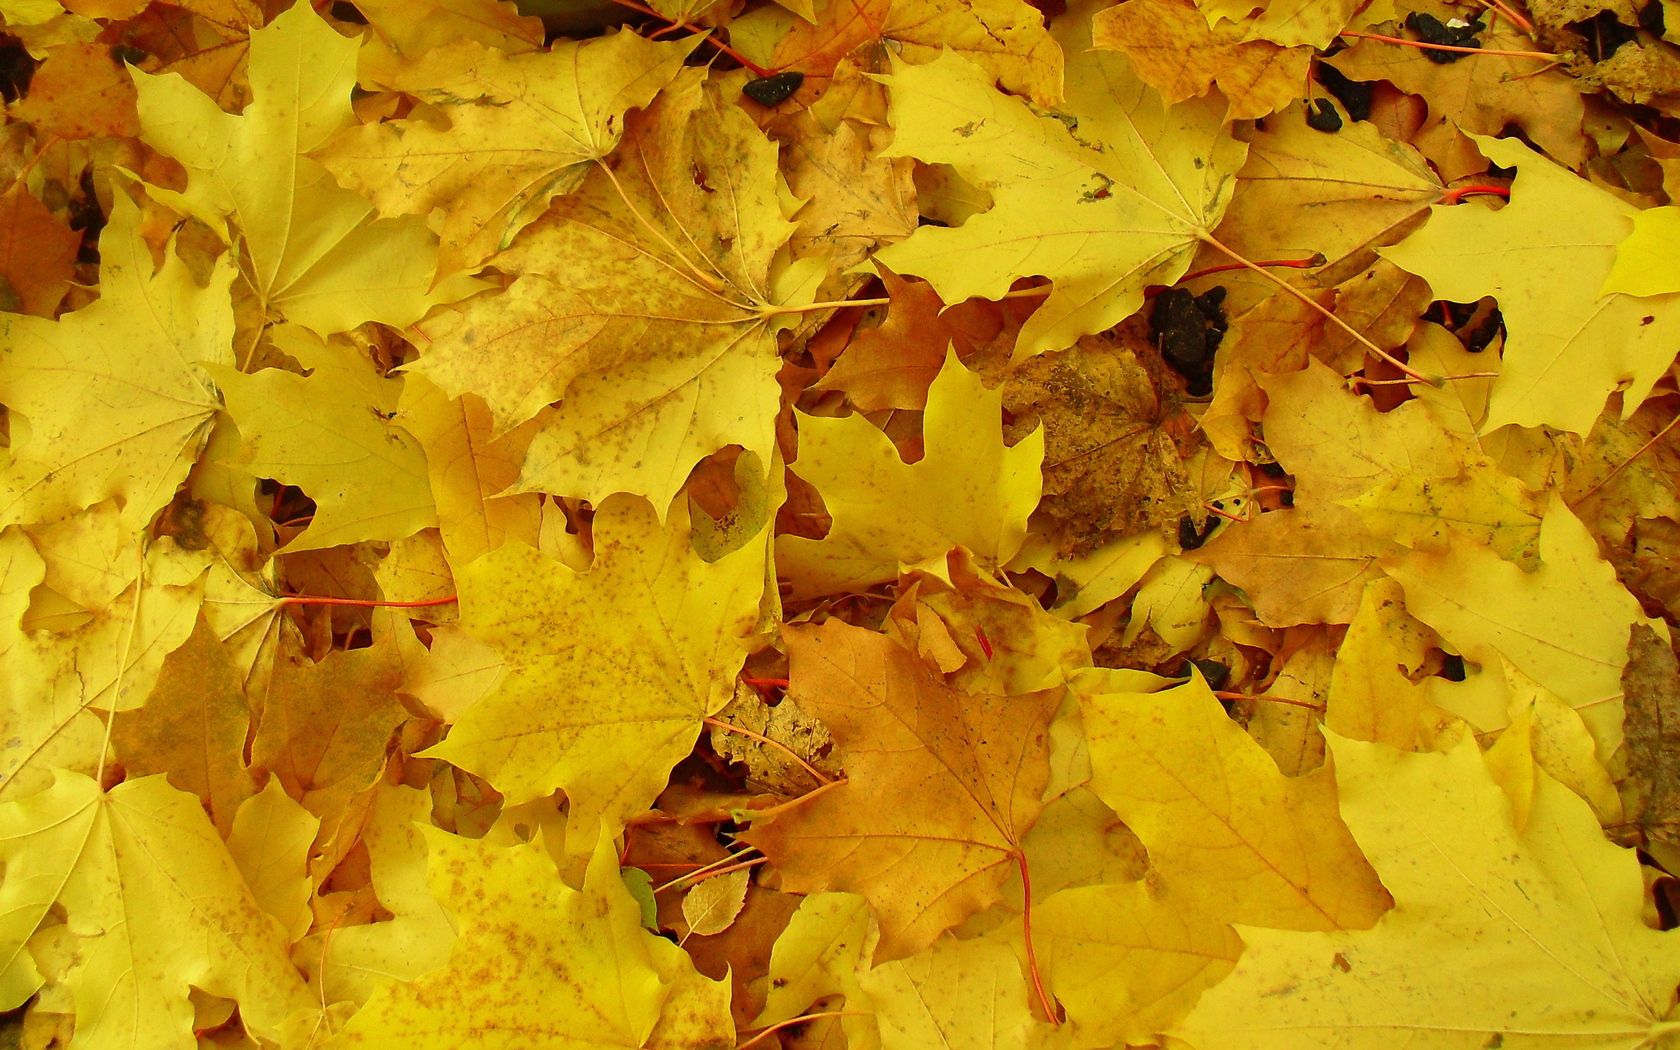 earth, leaves, nature, land, background, yellow, maple High Definition image